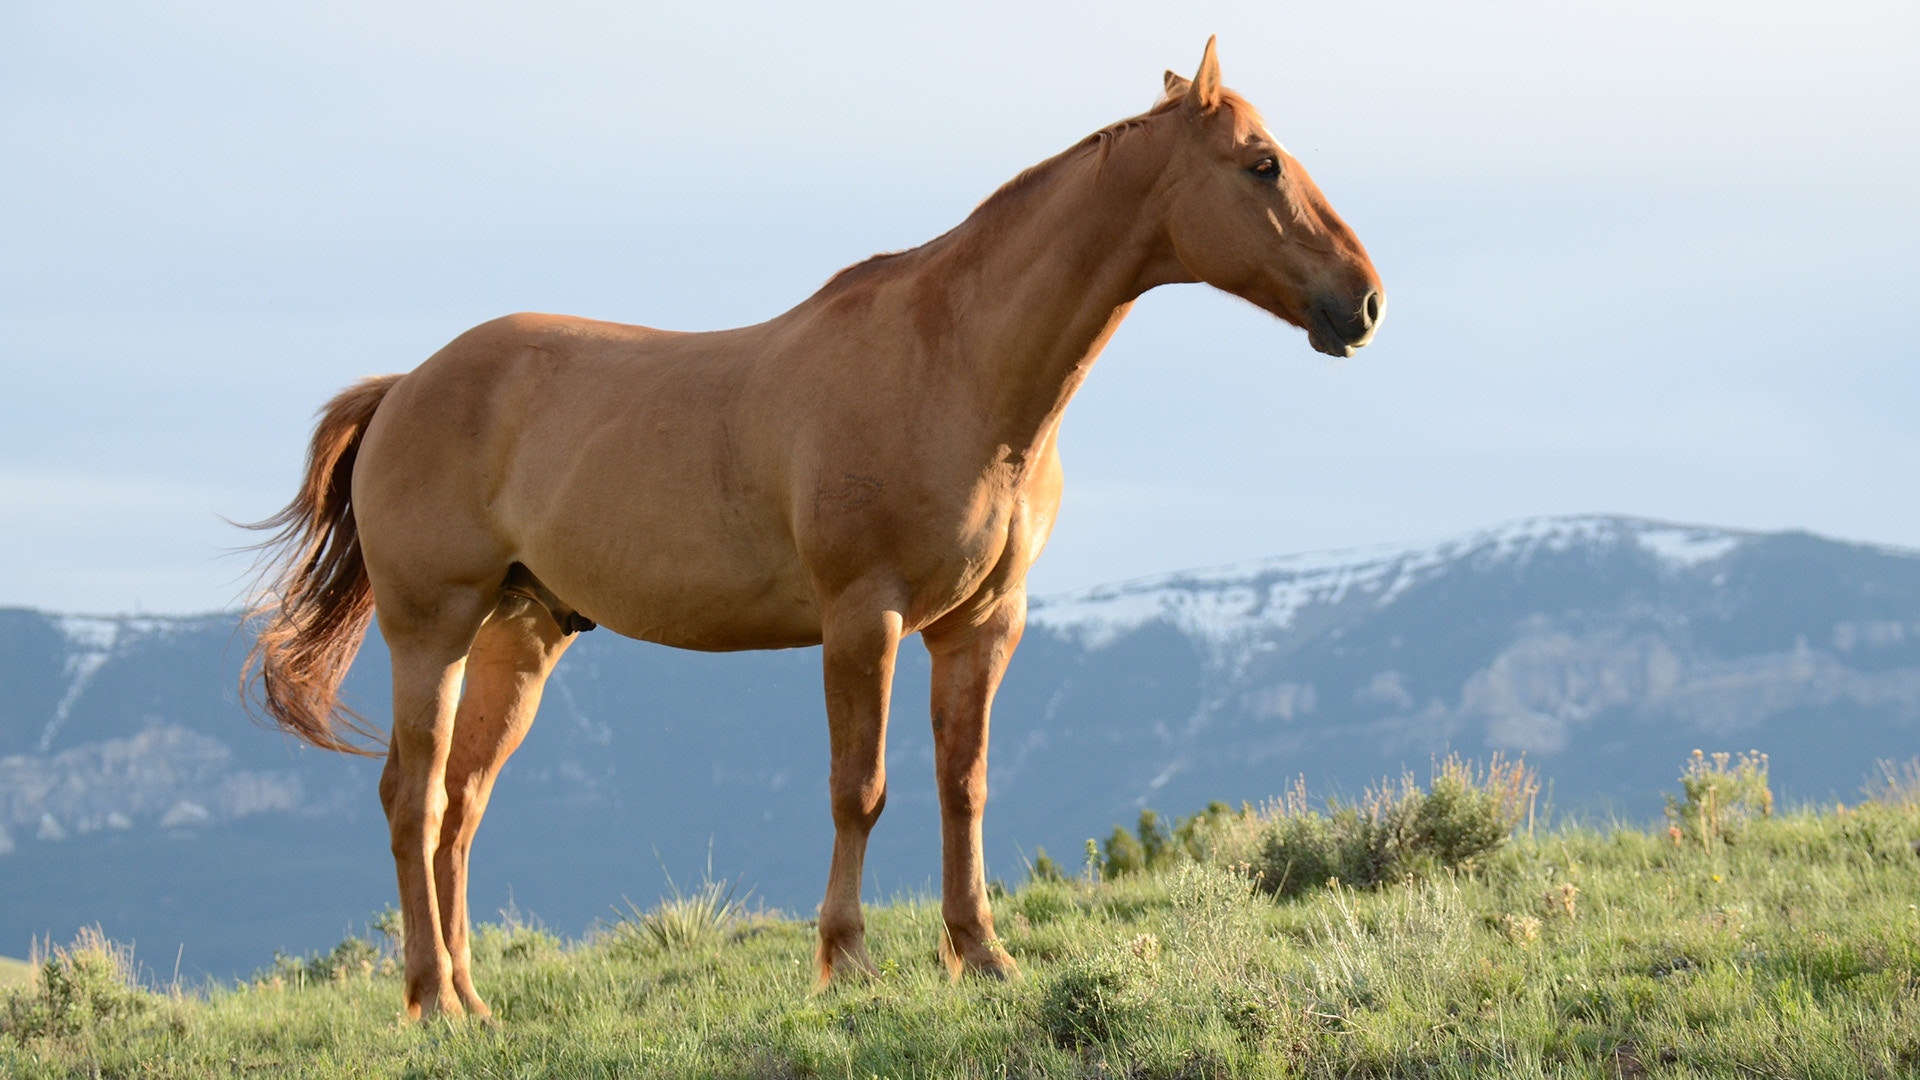 Going Saddle-Free: How to Mount a Horse Without a Saddle